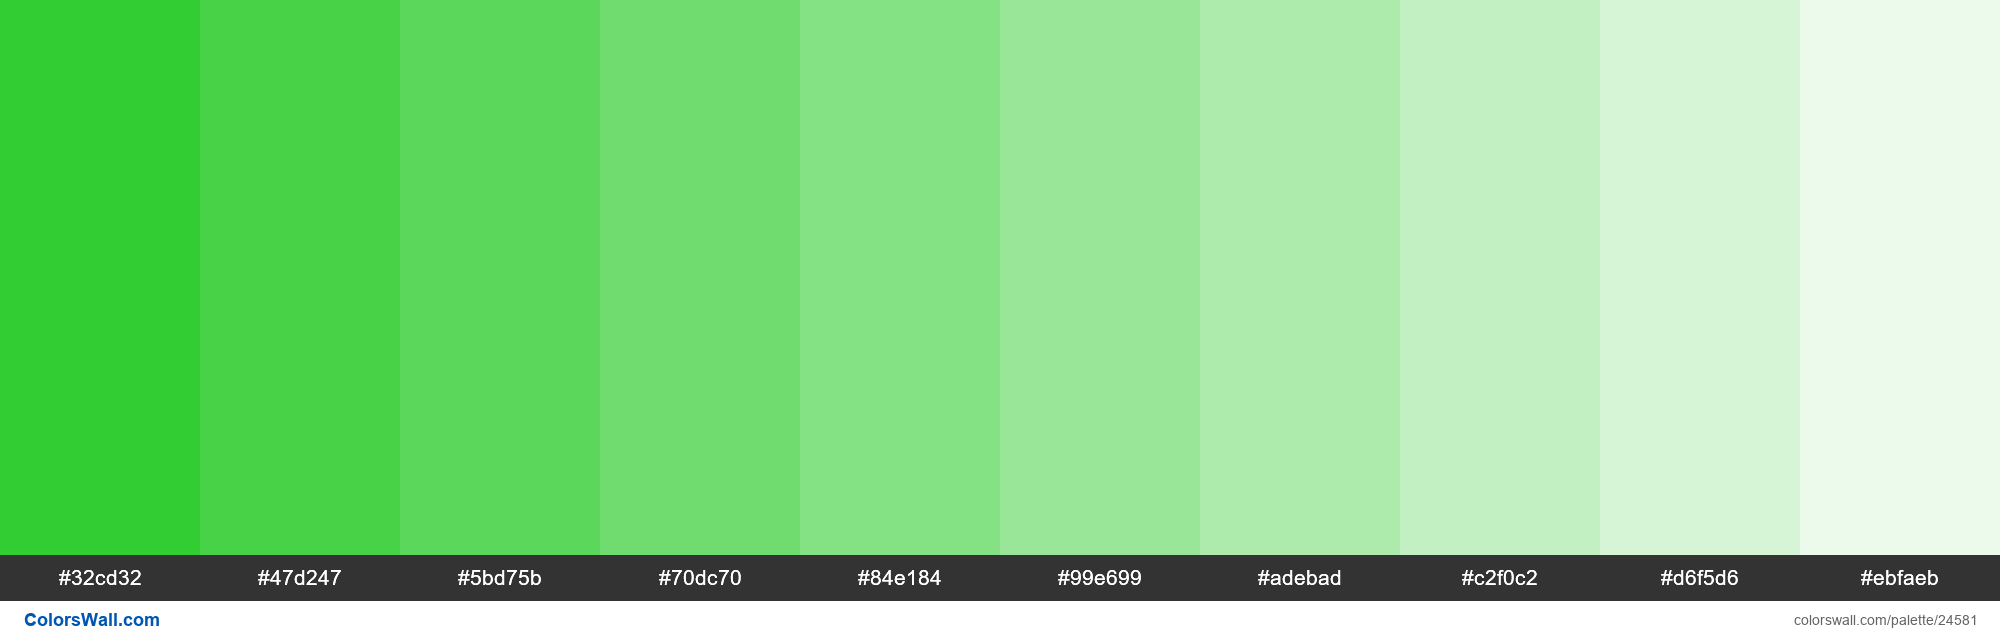 shades of lime green Color Palette